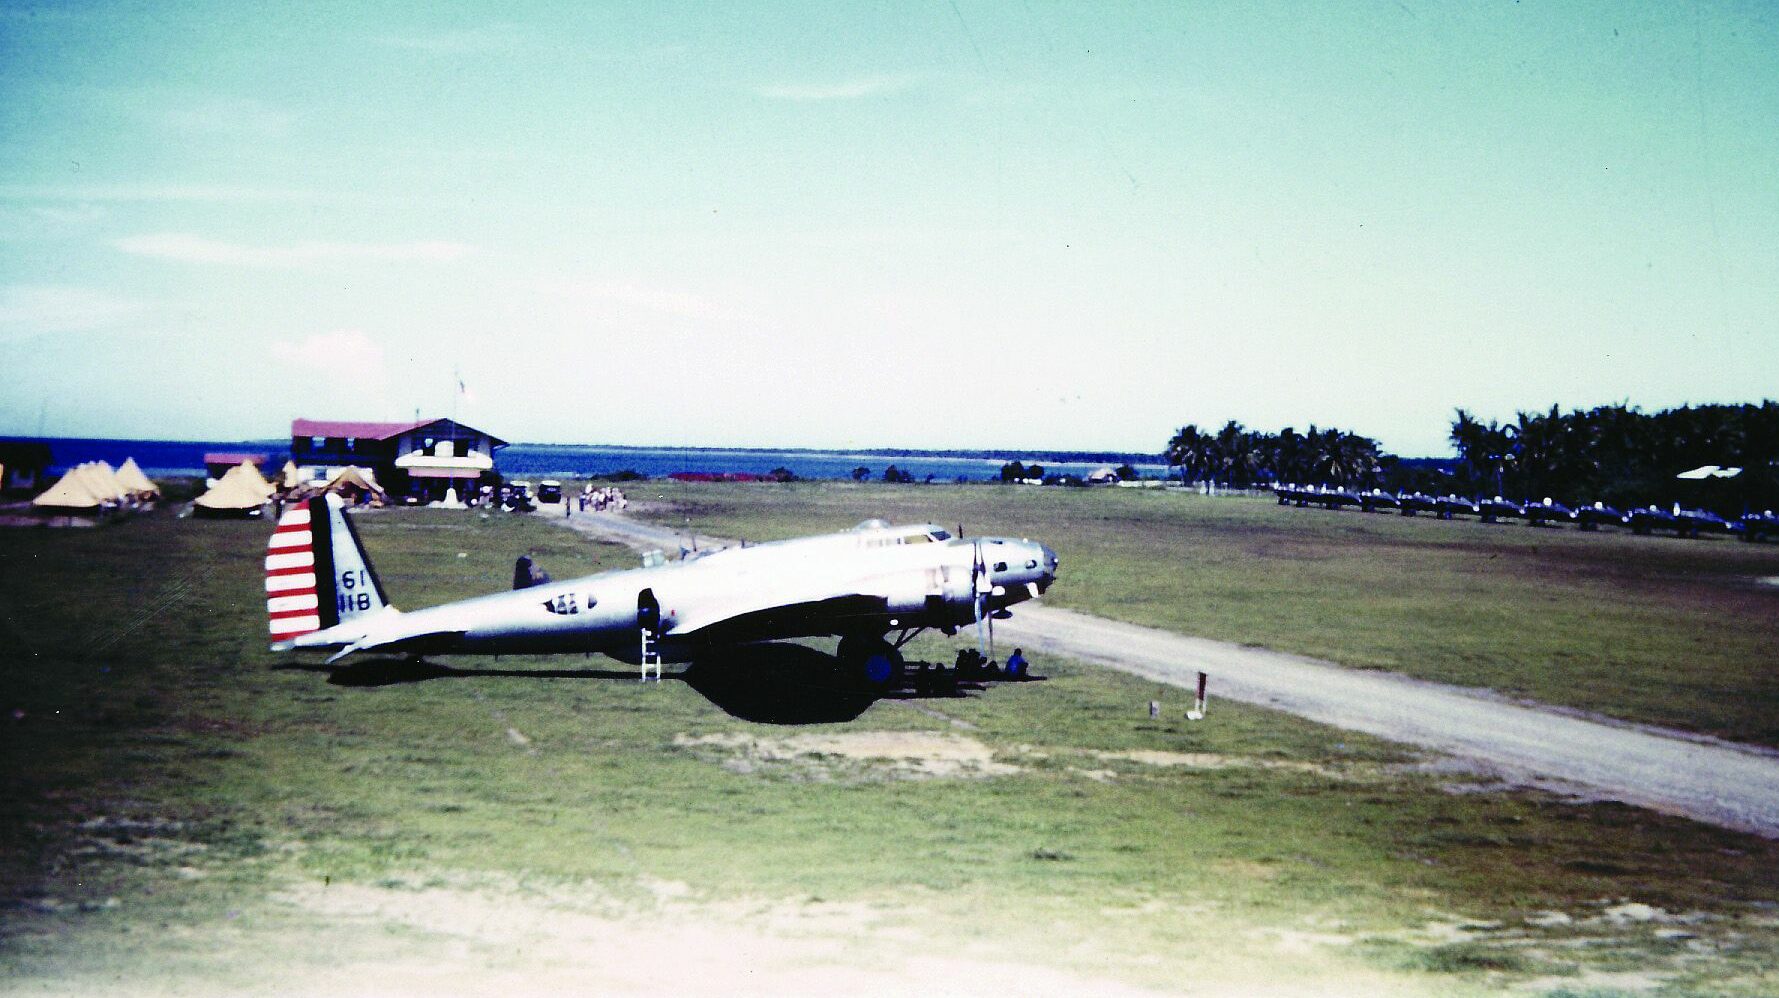 A B-17D Flying Fortress sits on the tarmac at Iba Field, Philippines, while visiting from Clark Field in October 1941 on the eve of war. The following month, the 19th Bombardment Group was formed. By the time the Japanese attacked in December, most of the 19th Group's B-17Ds had been repainted in a khaki camouflage scheme.